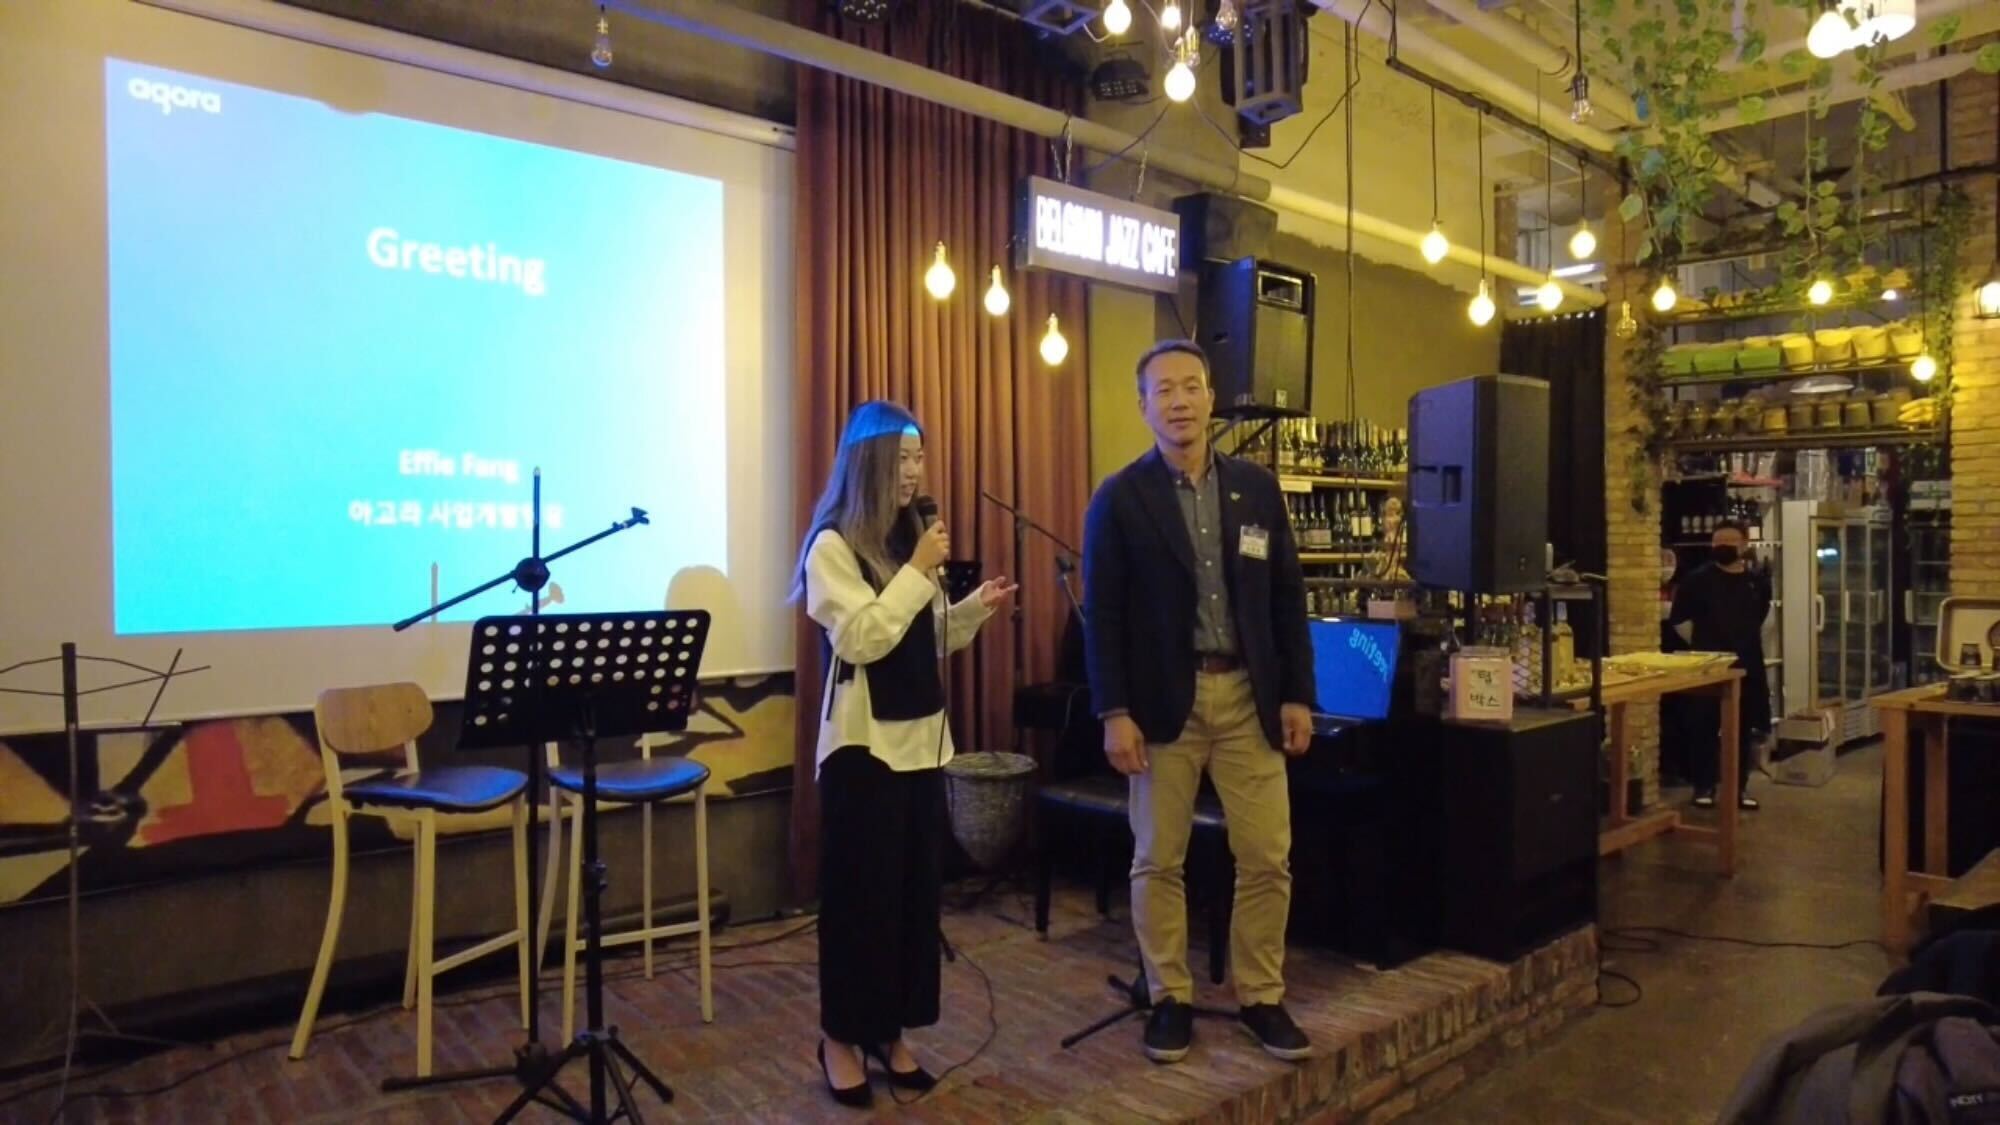 Two people presenting on a stage in Seoul, South Korea